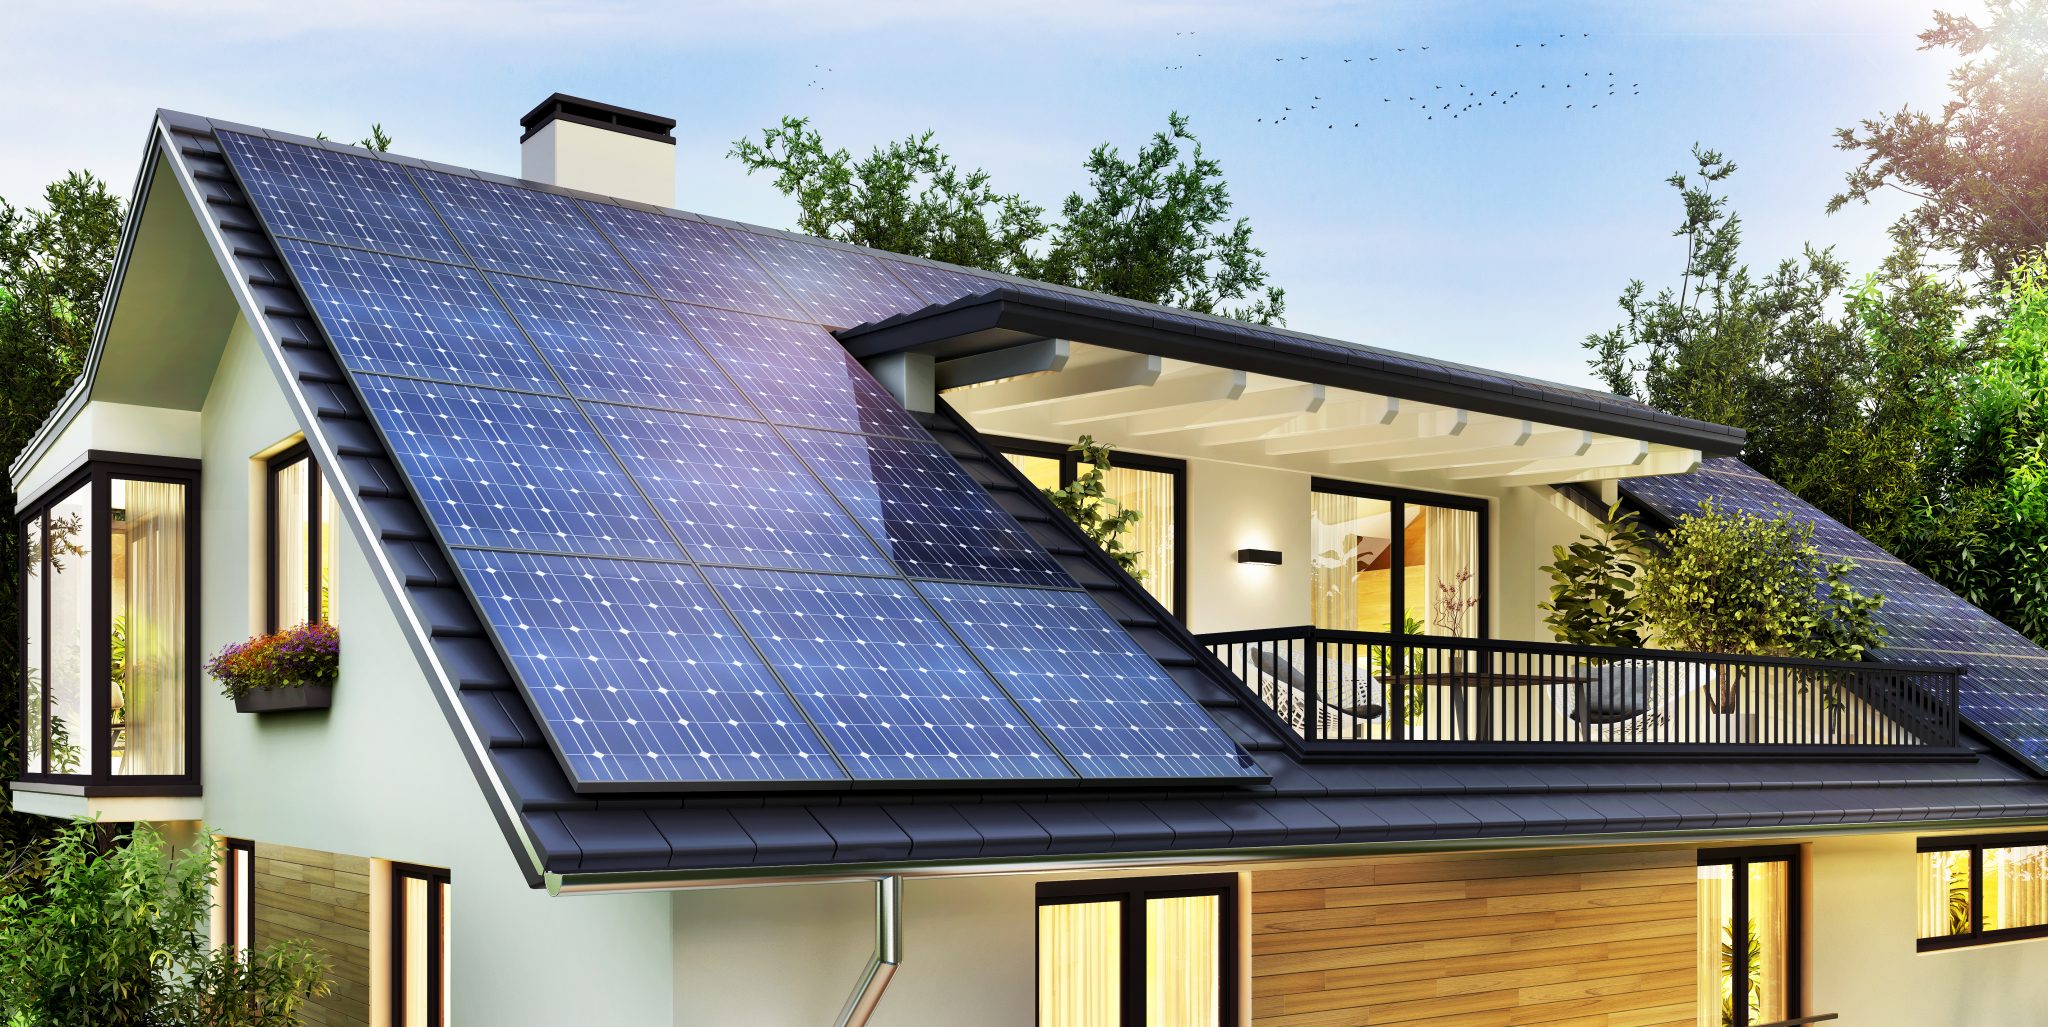 DIY Household Solar Power System: 4 Things To Know - Useful DIY Projects